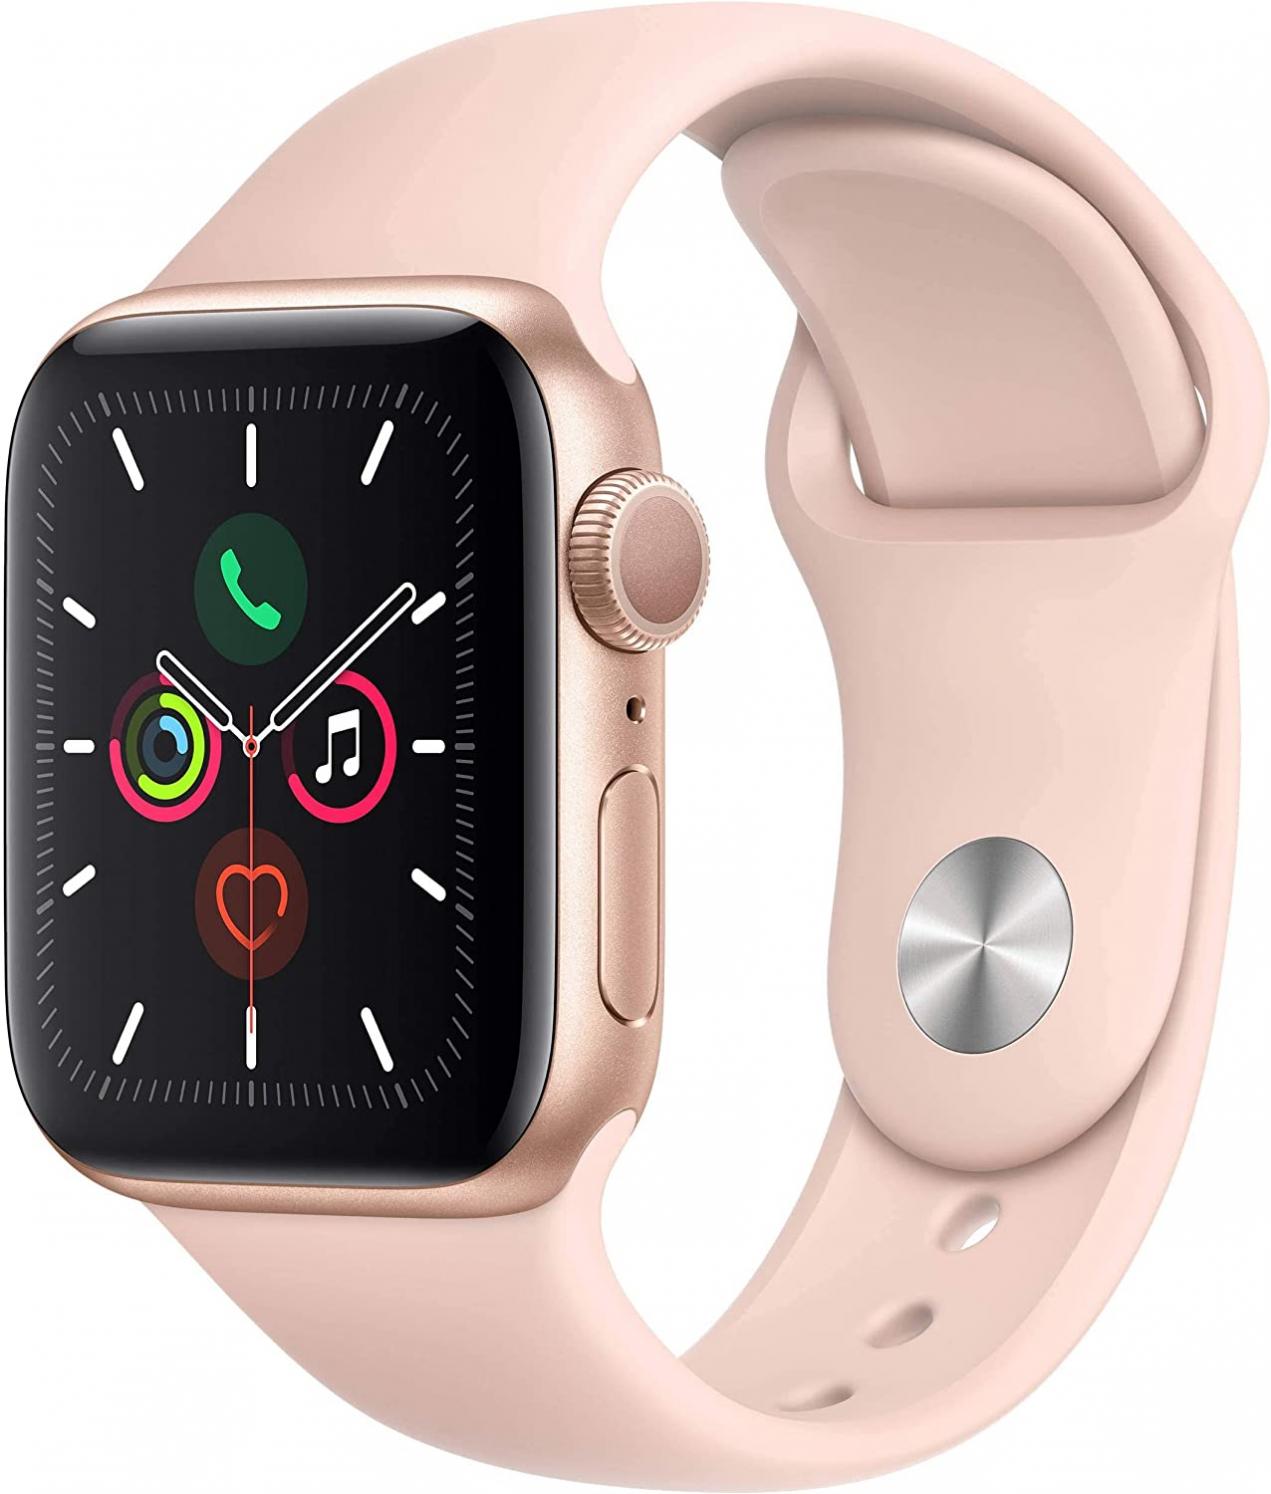 Apple Watch Series 4 (GPS, 40MM) - Gold Aluminum Case with Pink Sand Sport Band (Renewed)